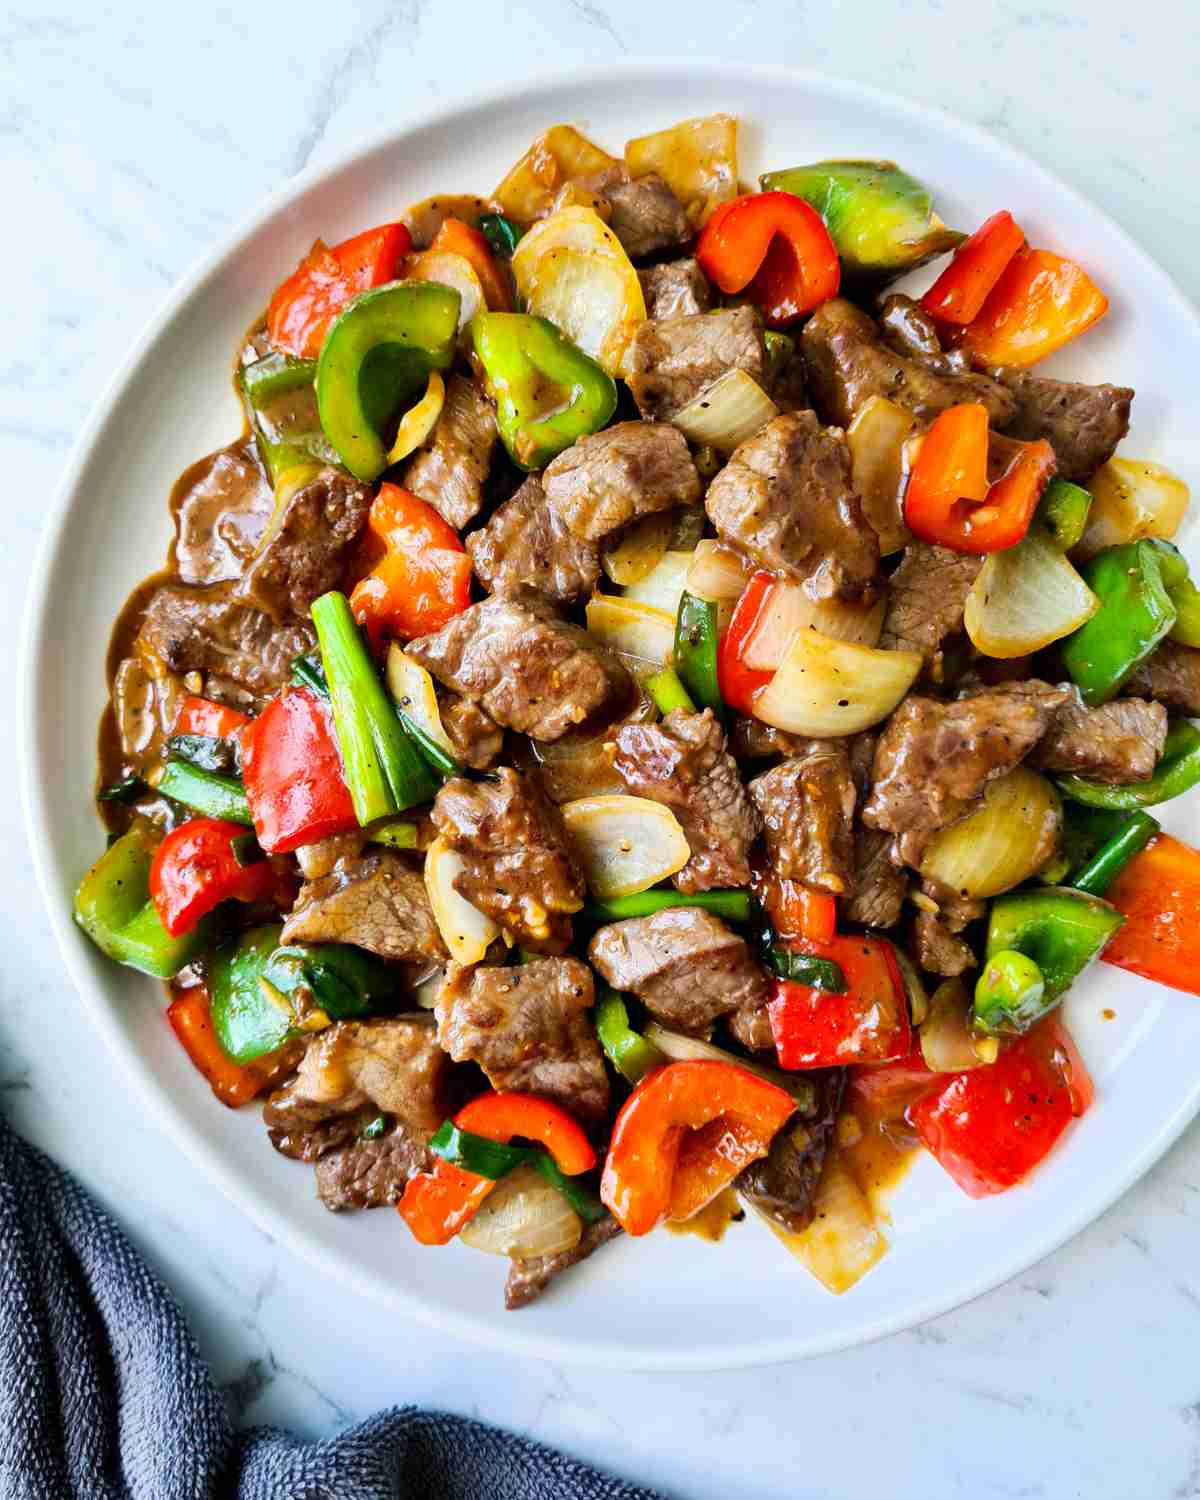 beef cubes and vegetables in a black pepper sauce on a round white plate